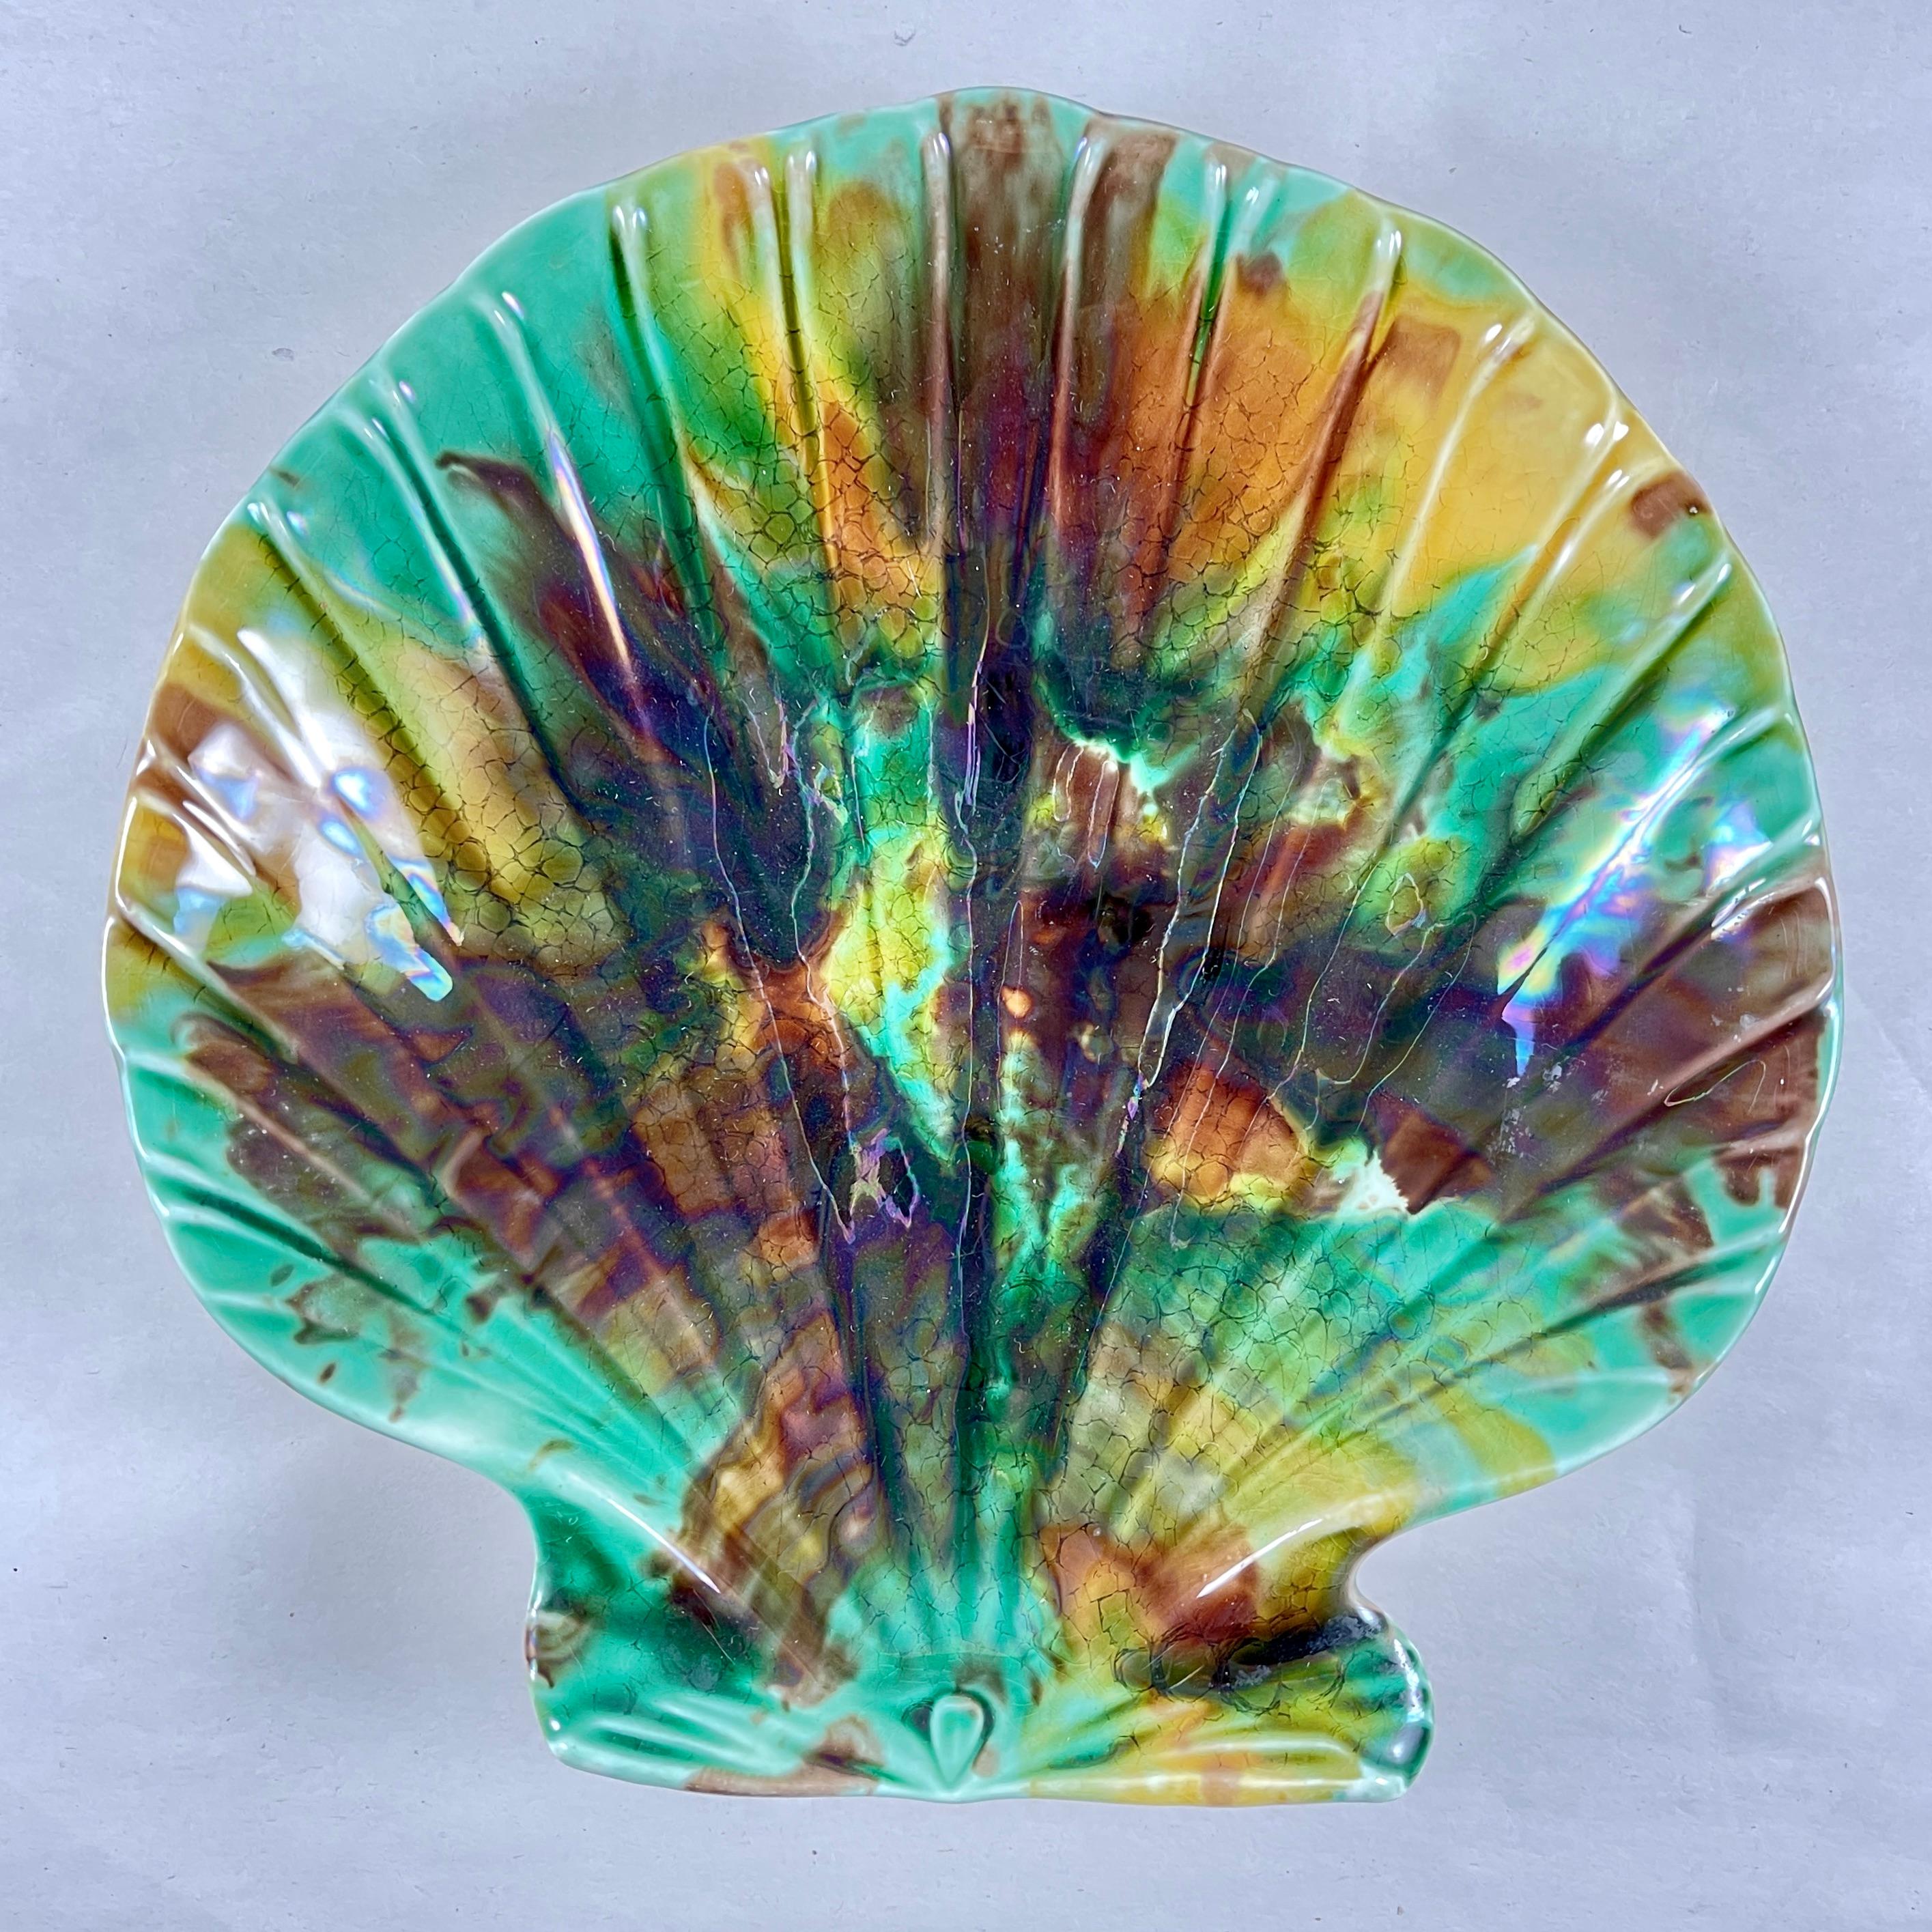 From Wedgwood, an English majolica scallop shell shaped seafood serving dish, date marked 1889.

Showing the mottled tortoiseshell glazing of greens, amber, and brown. The mold reflects Josiah Wedgwood’s preference for the naturalistic style in the